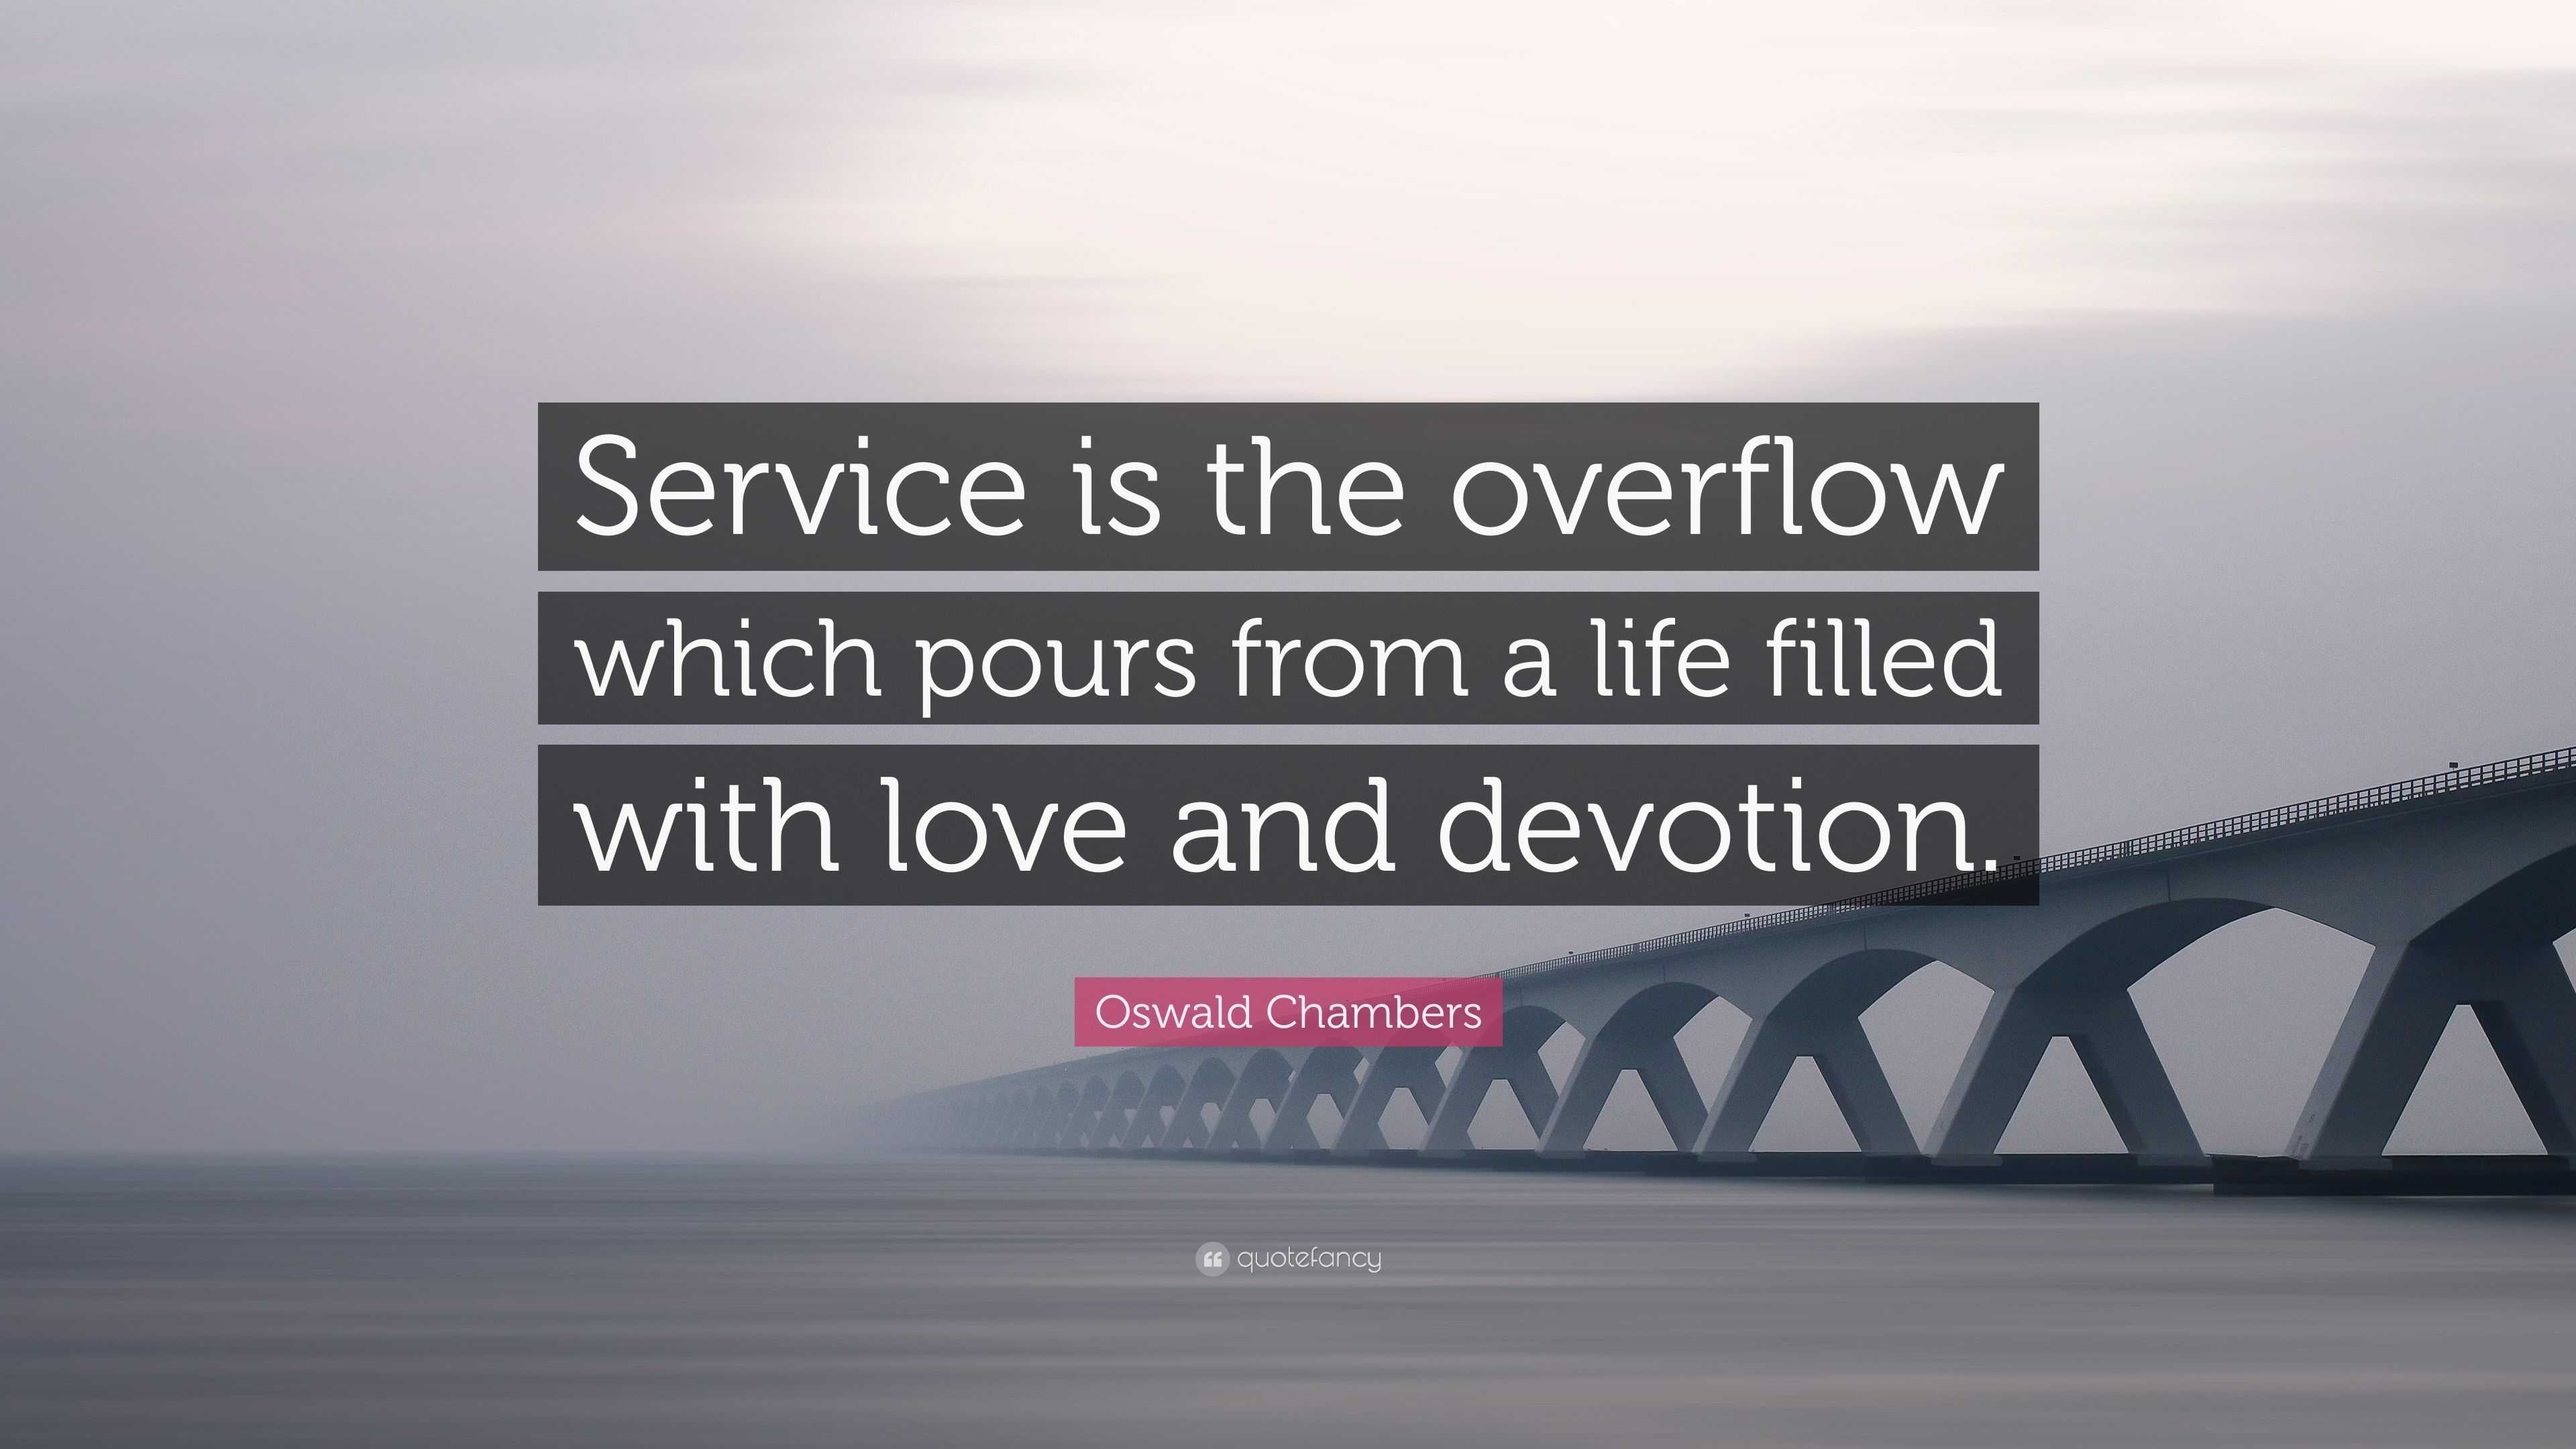 Oswald Chambers Quote “Service is the overflow which pours from a life filled with